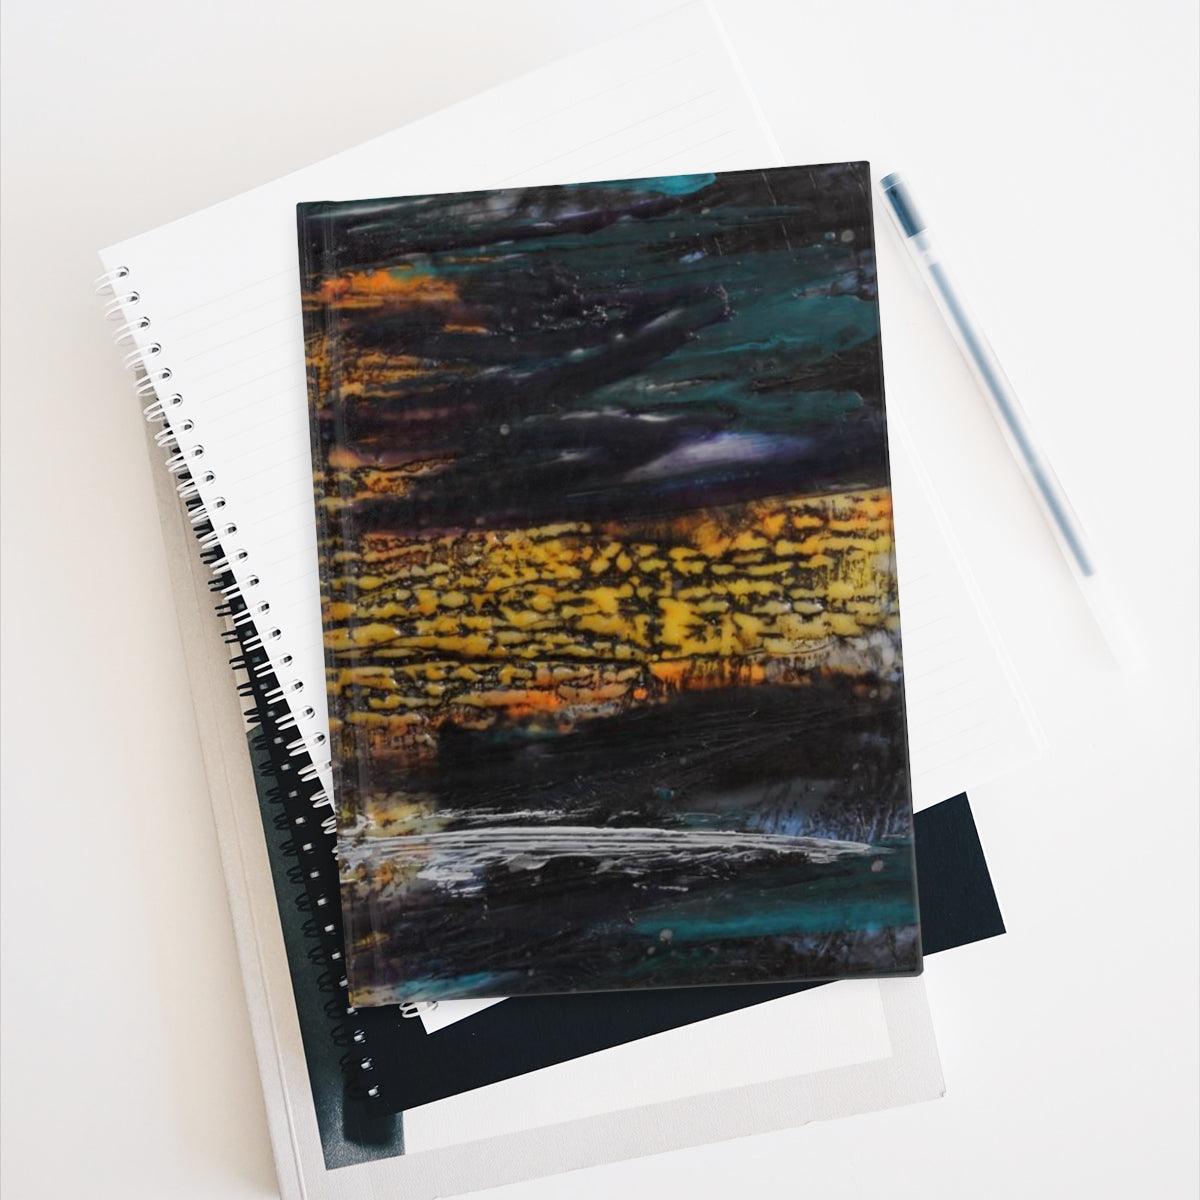 "In The Shadows There is Always Light" Journal - Ruled Line-Paper products - Mike Giannella - Encaustic Painting - Mixed Media Artist - Art Prints